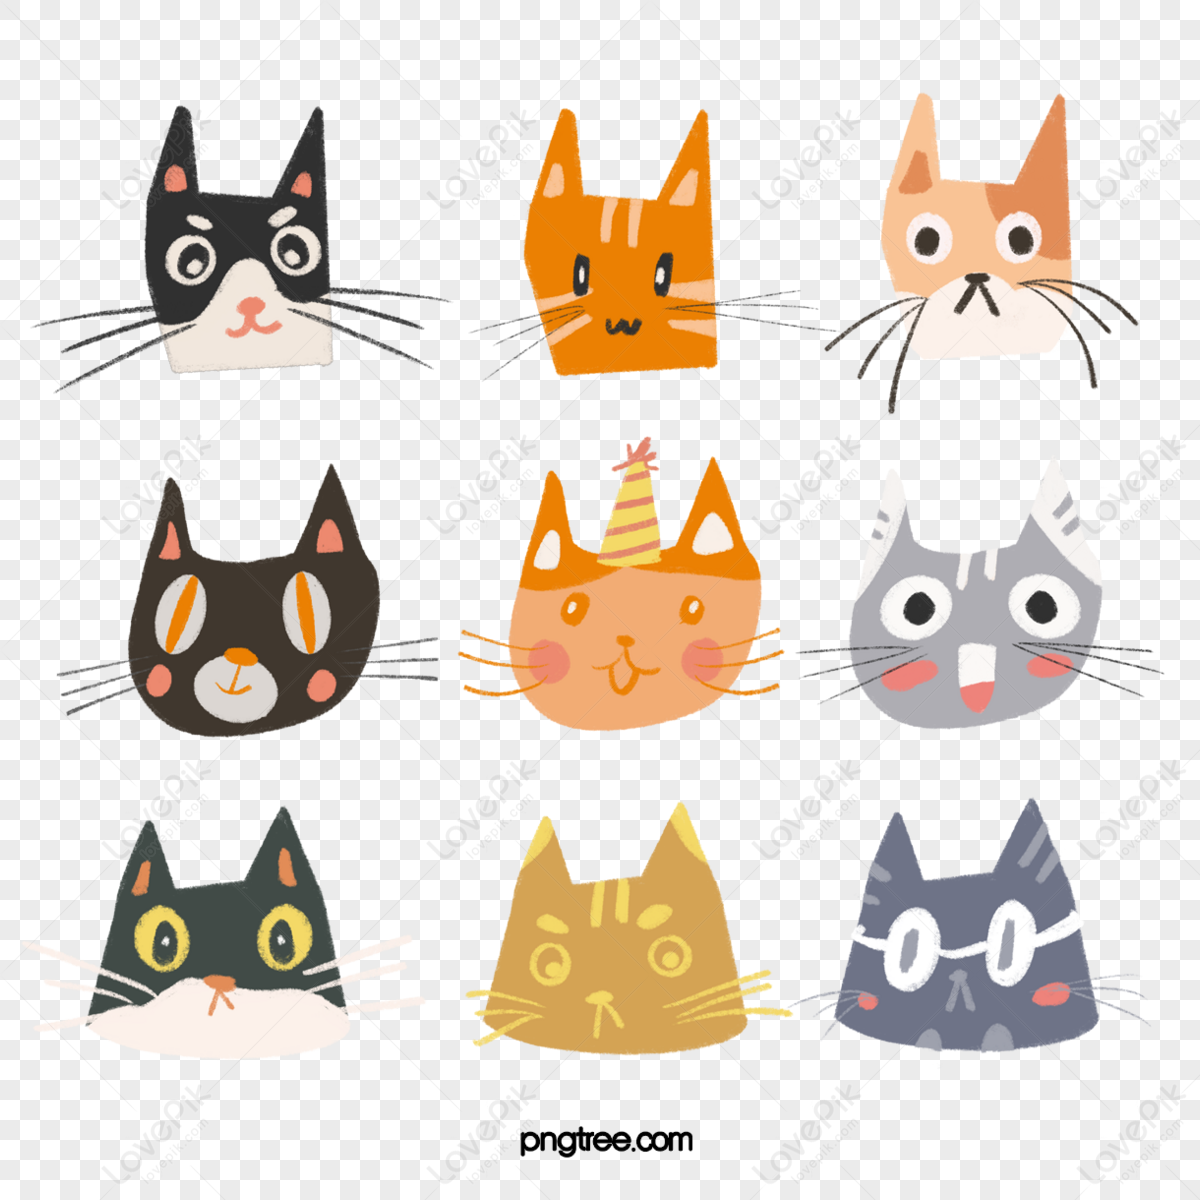 Cat Angry Rage Face Artwork Vector PNG Images, Adorable, Animal, Cartoon  PNG Transparent Background - Pngtree